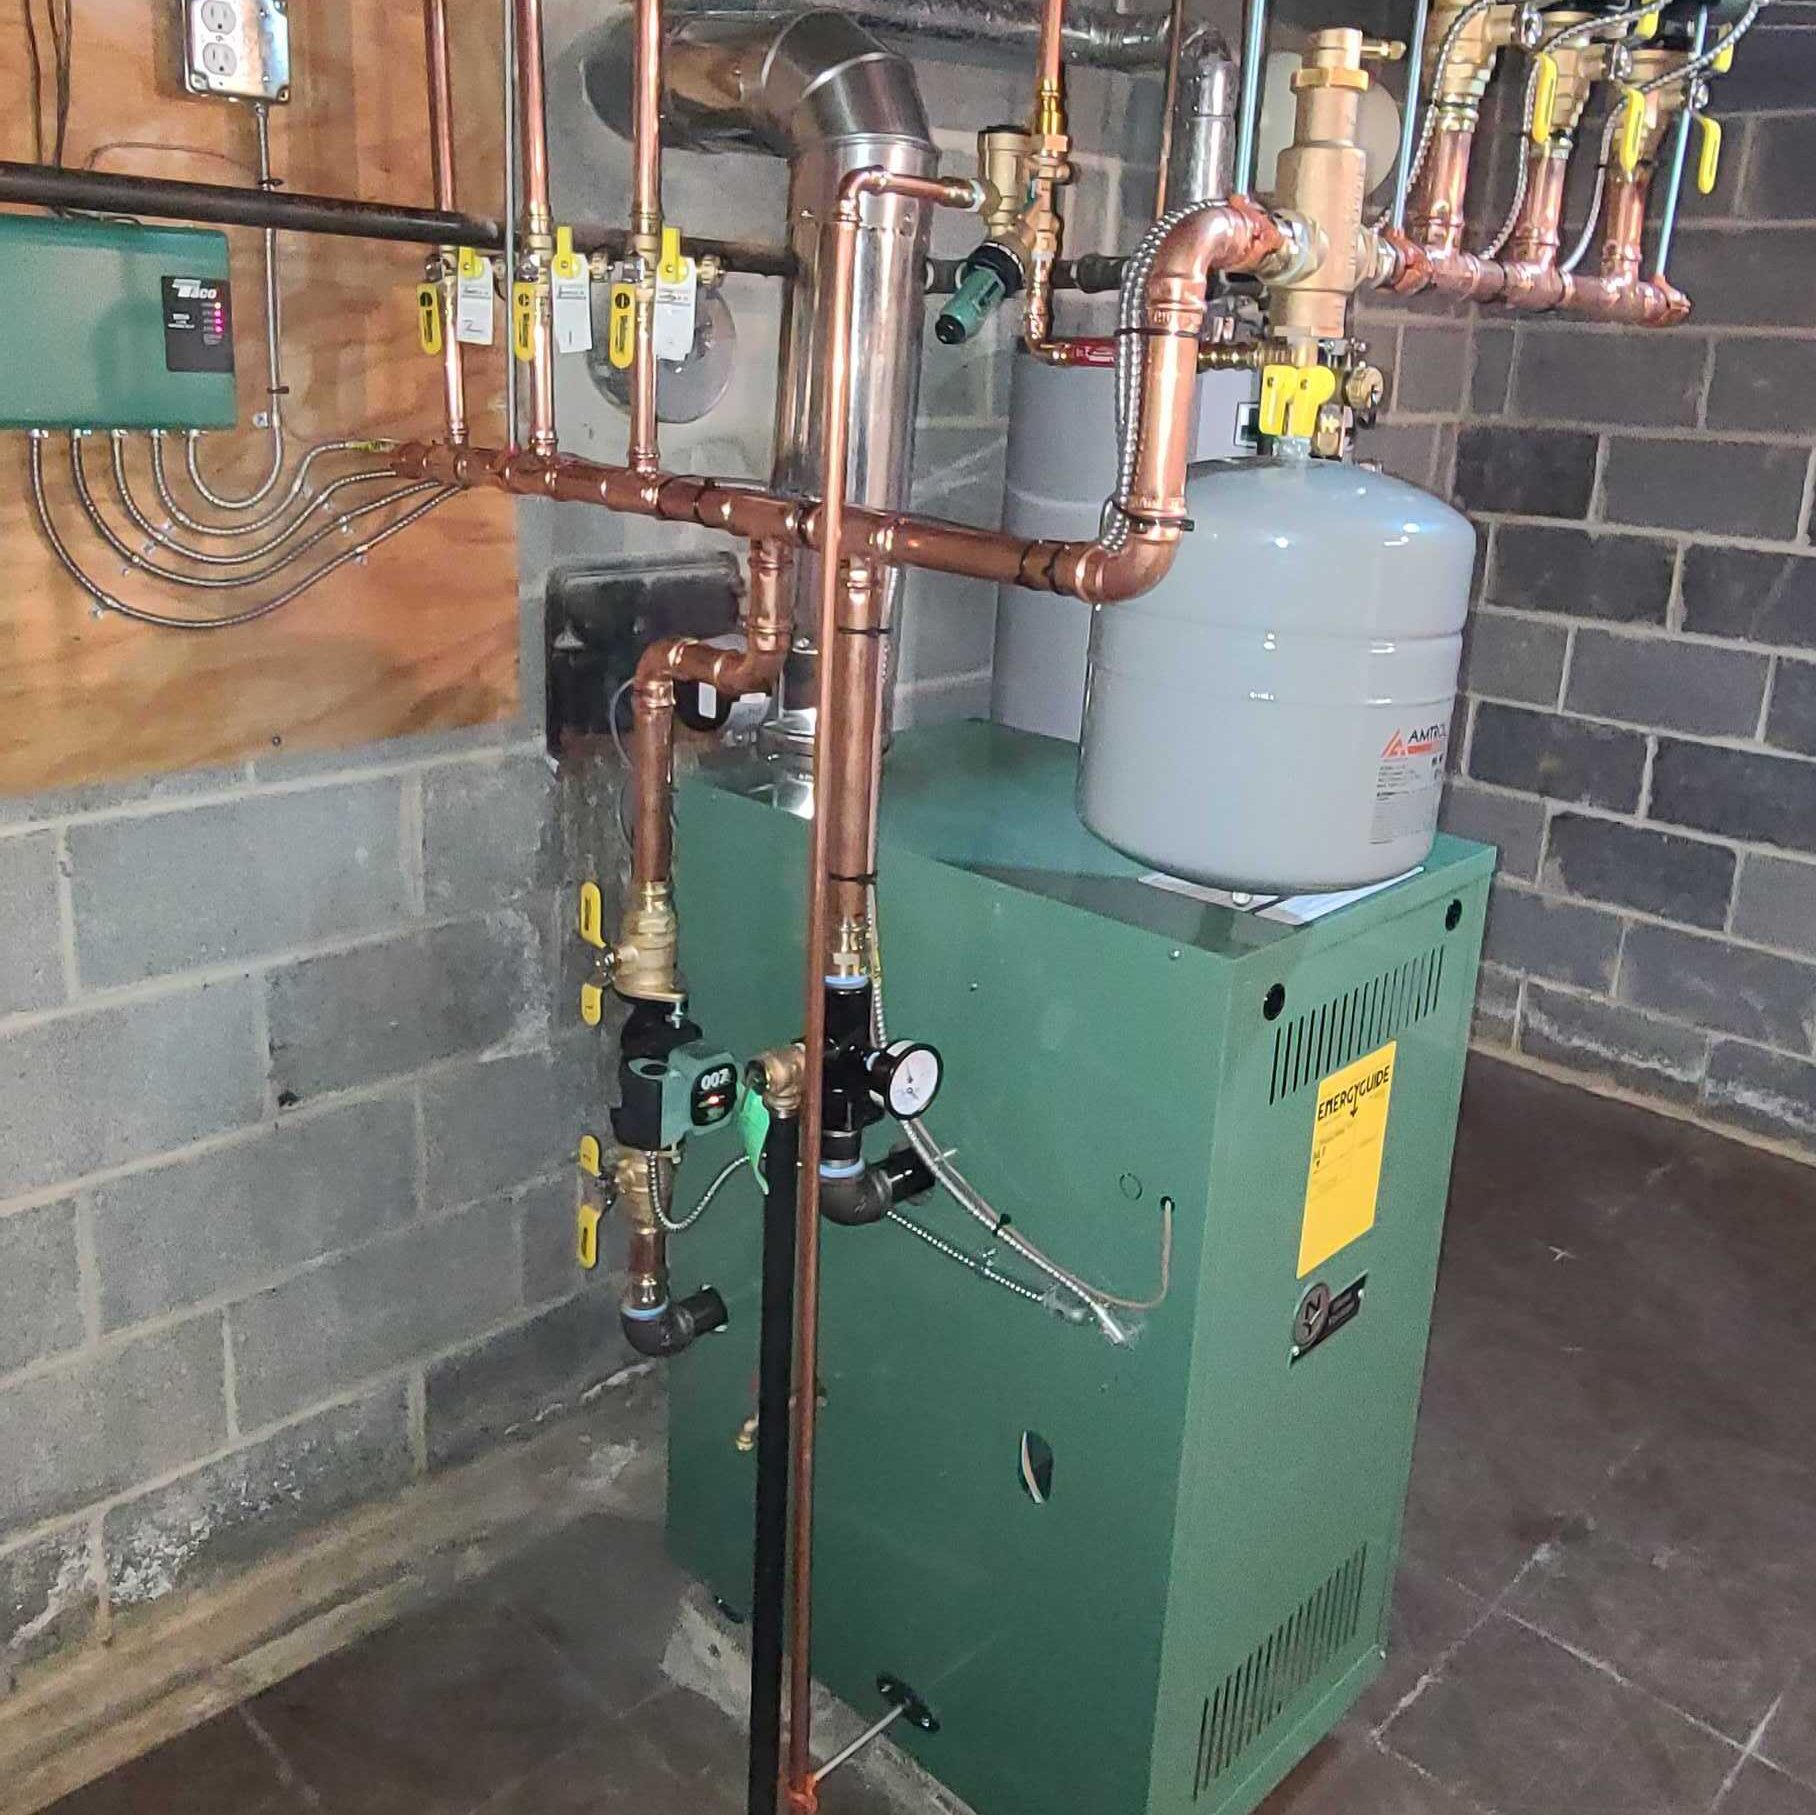 Gas boiler replacement near Haverford Township PA. McGinley Services heating and cooling